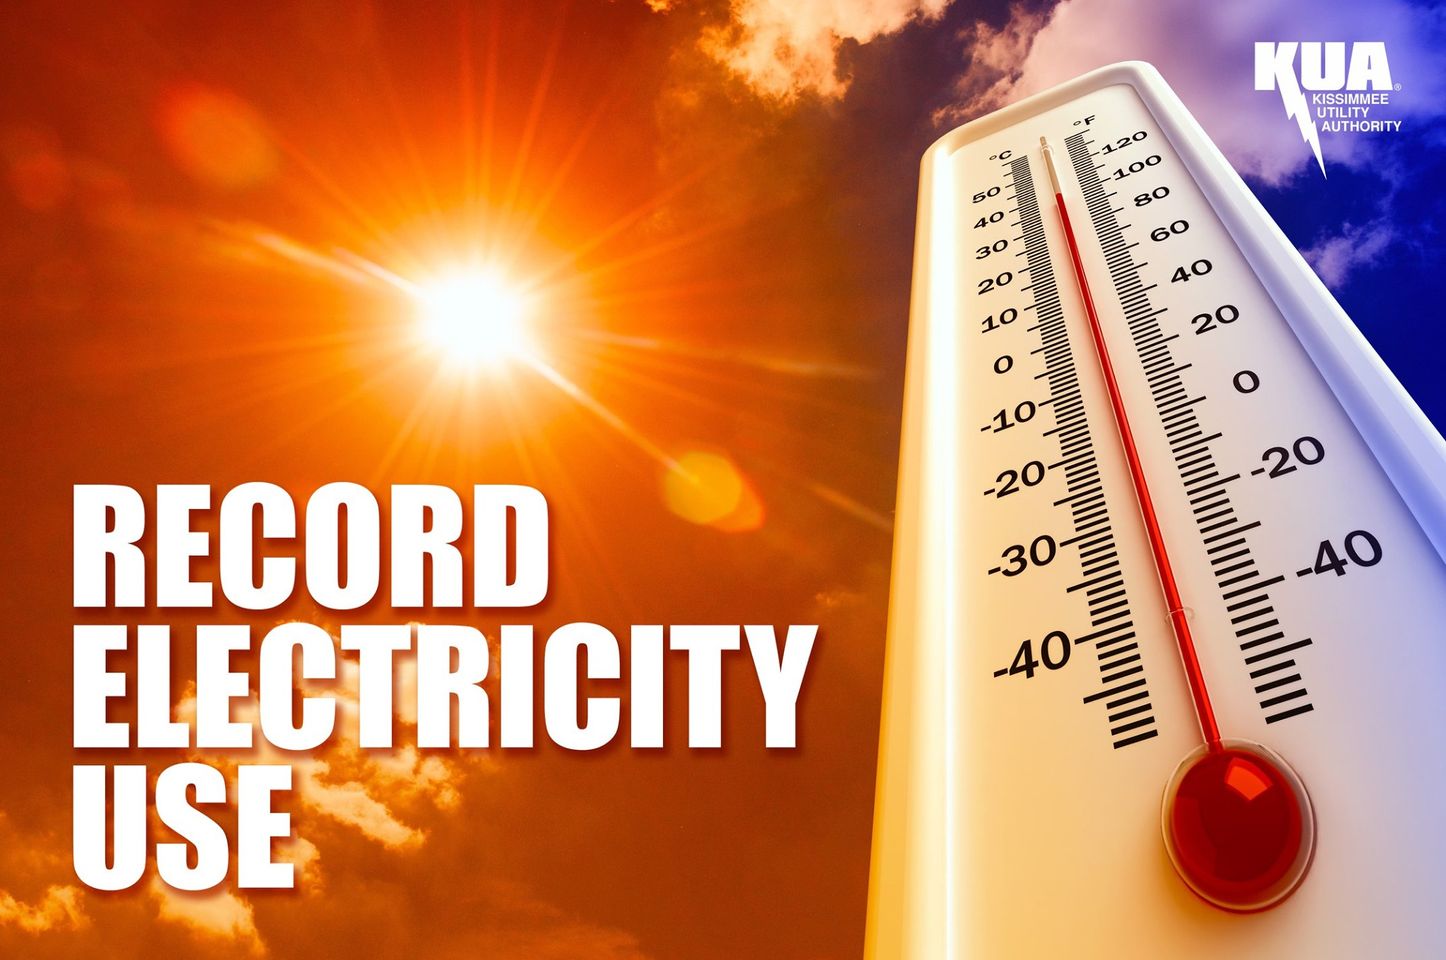 Heat Wave Prompts All-time High for Electricity use in Kissimmee for Second Consecutive Day